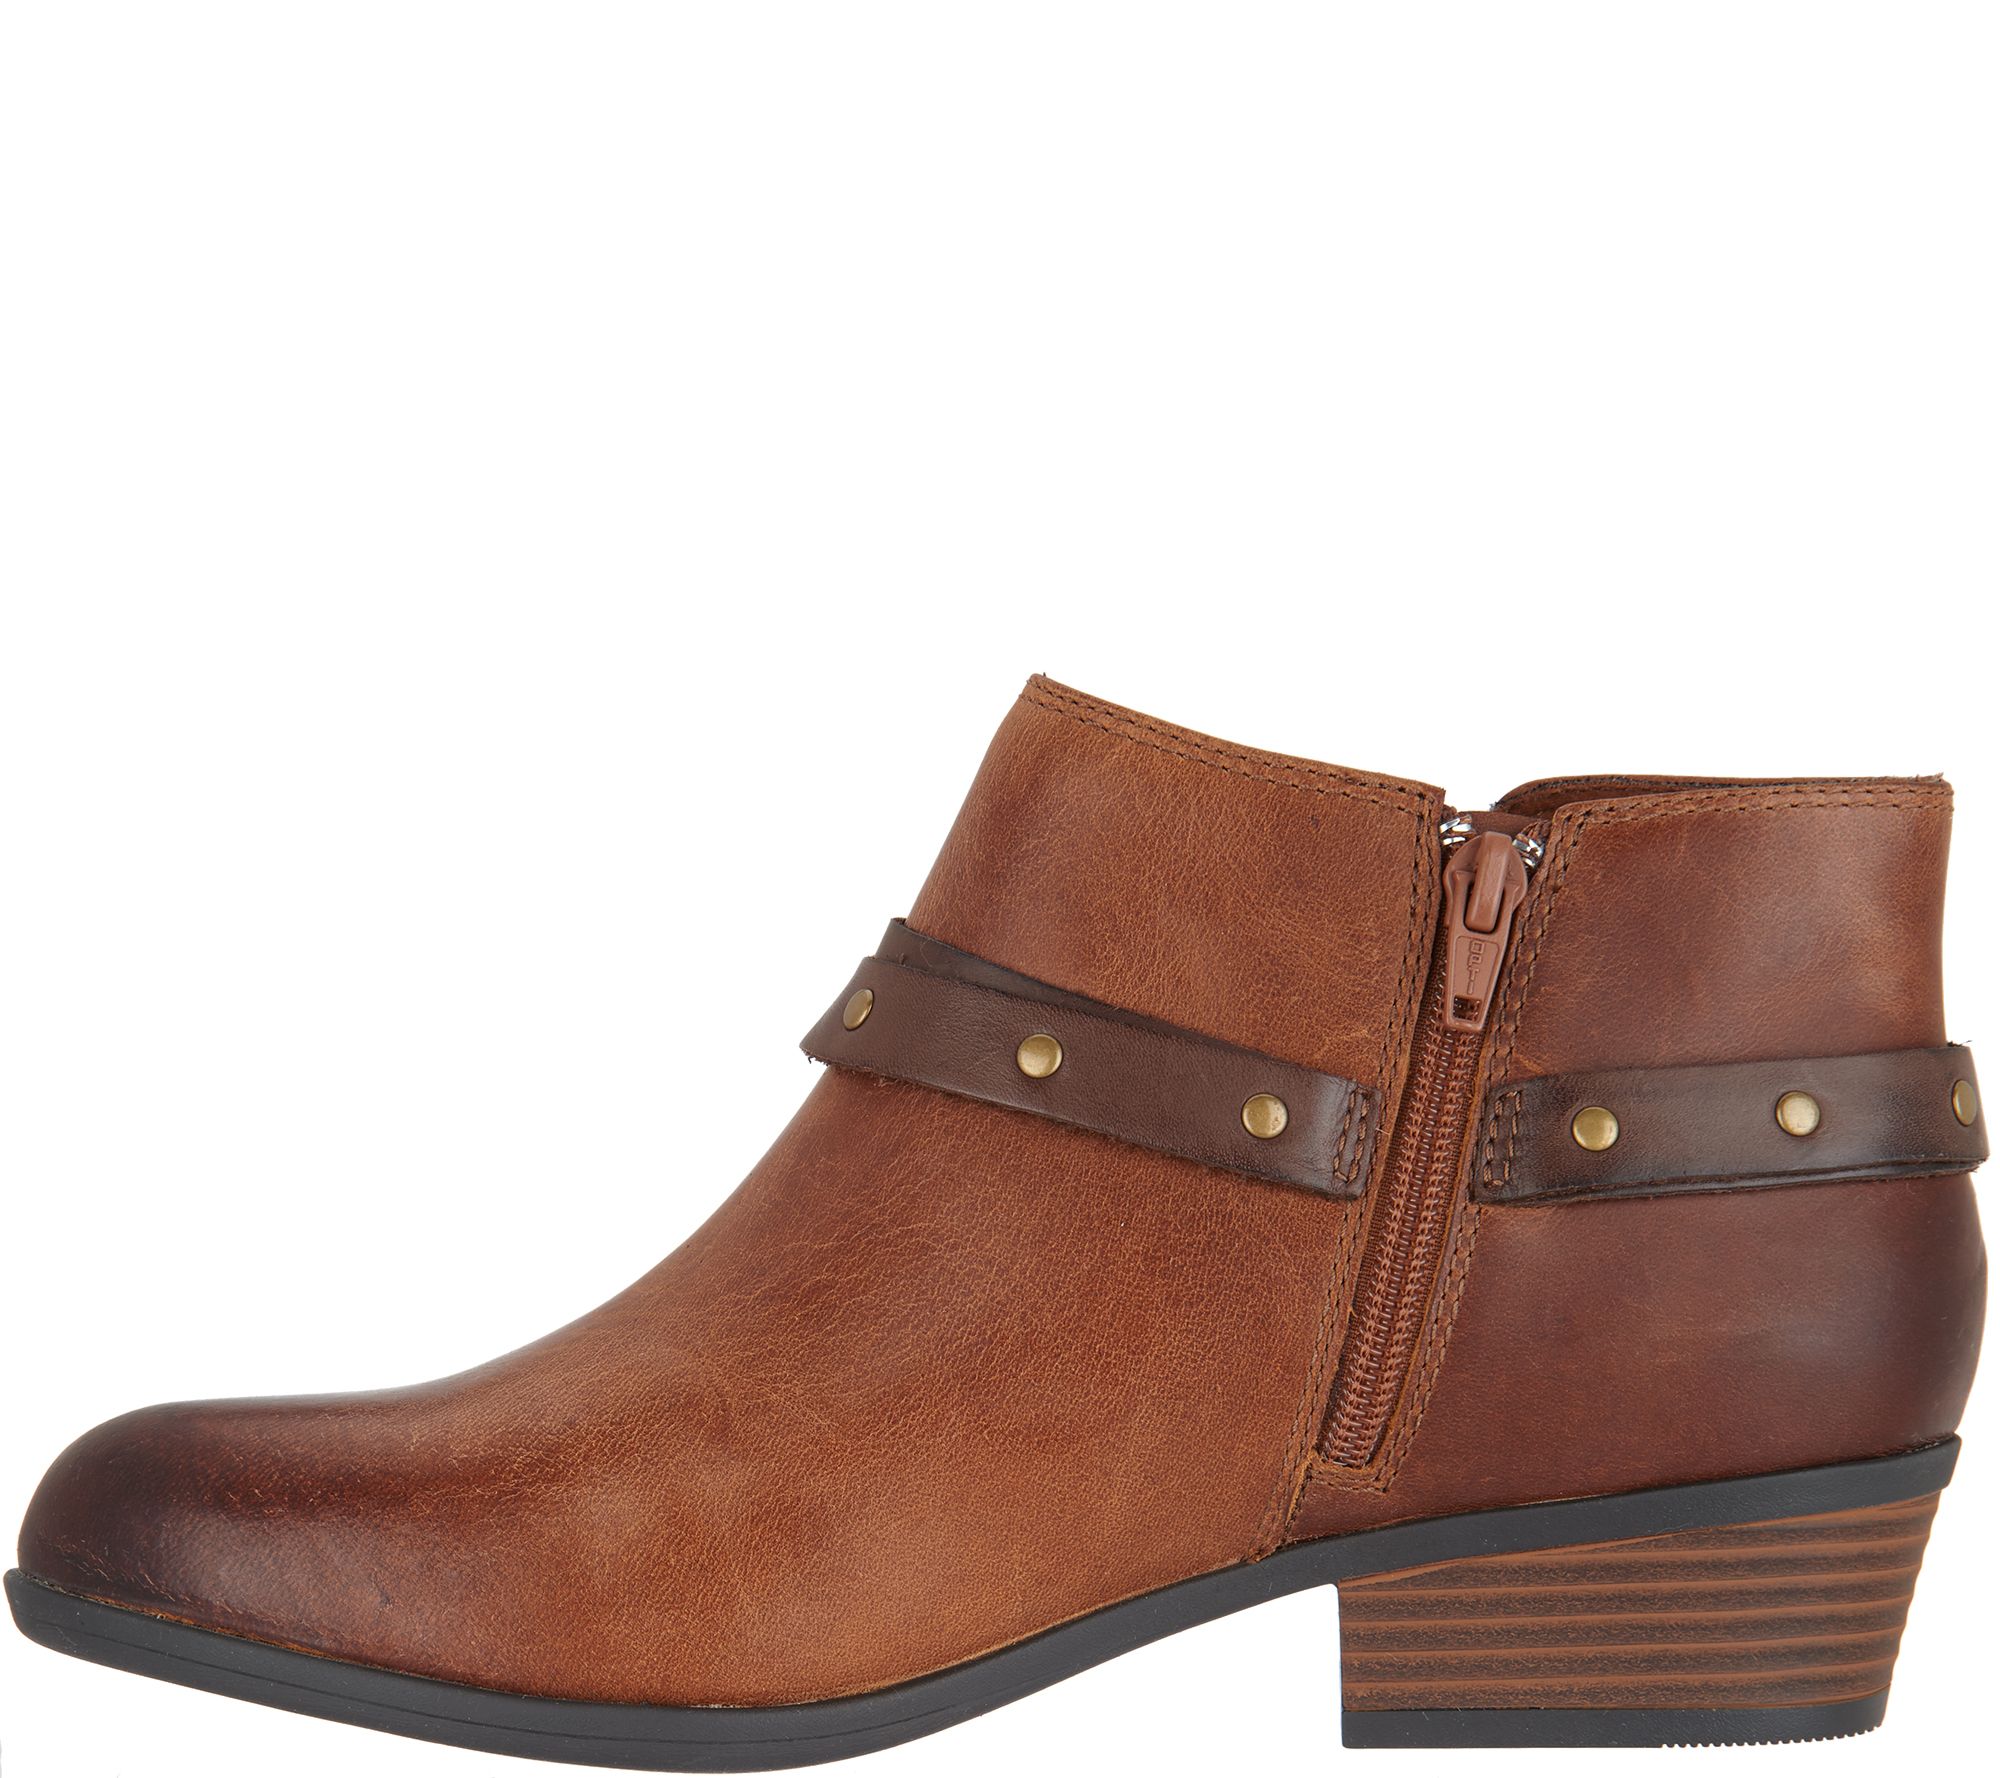 Clarks Leather Side Zip Boots - Addiy Zoie - QVC.com